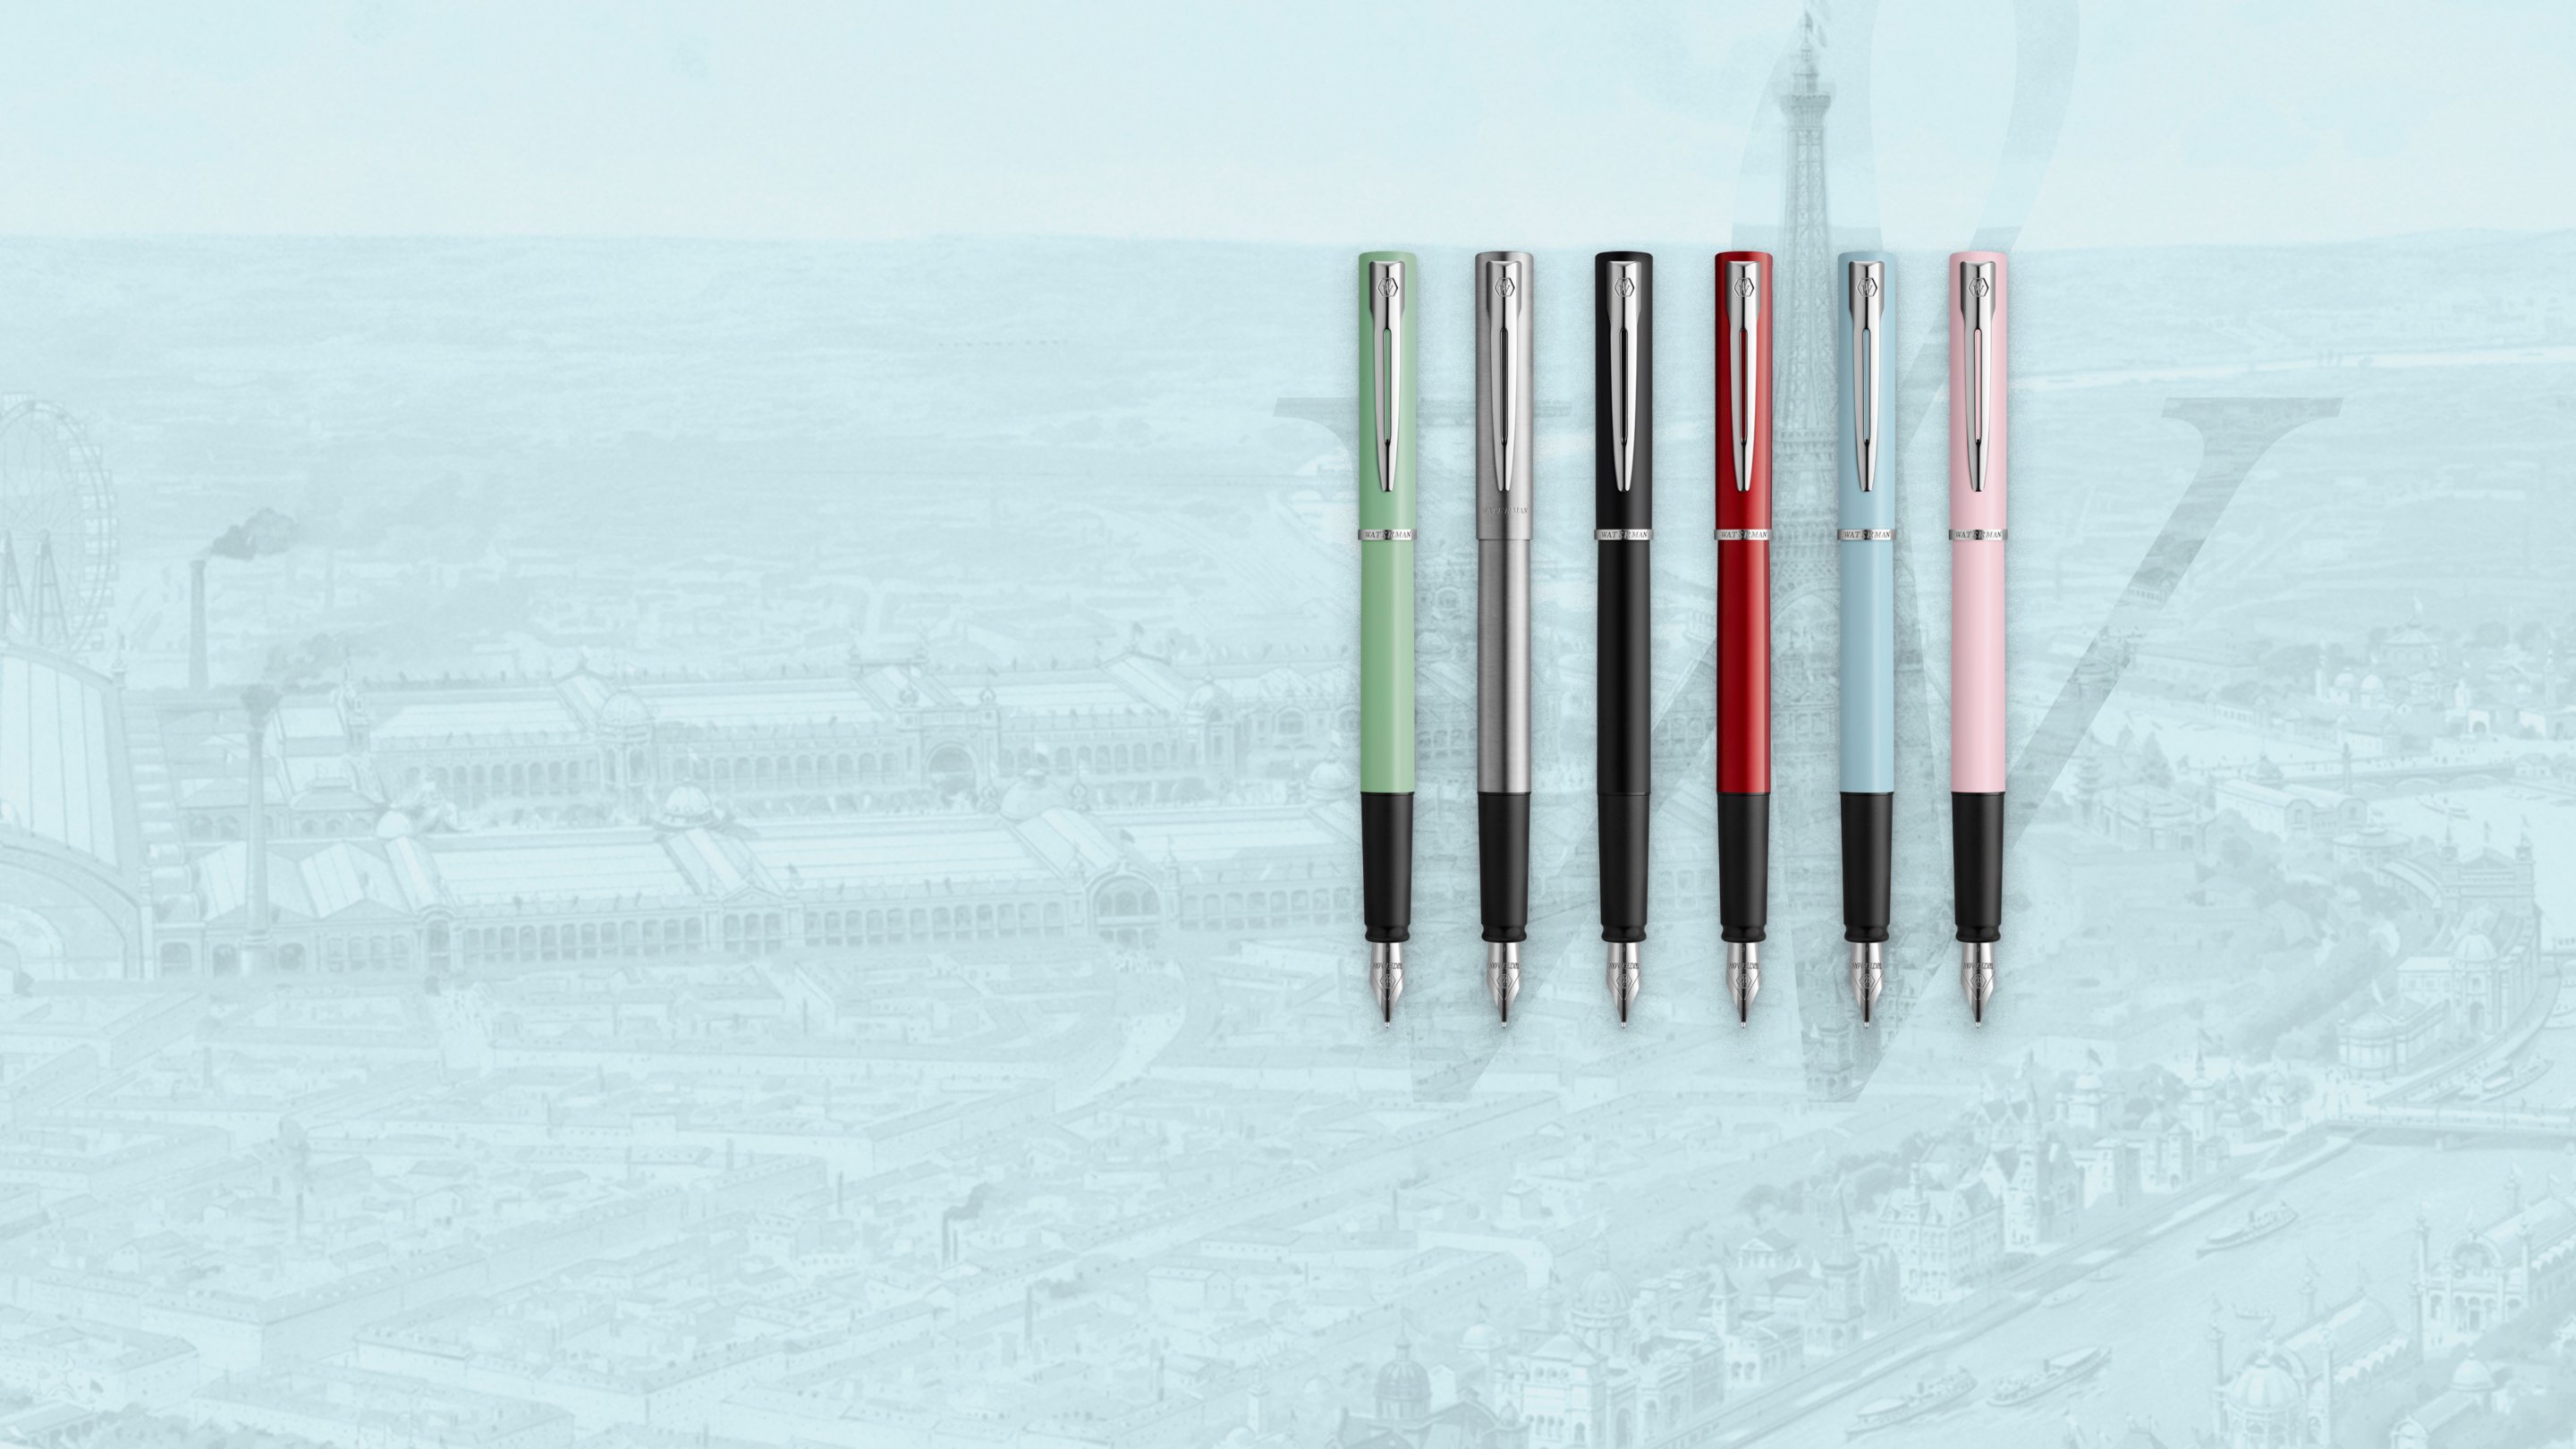 Six upright Allure fountain pens with chrome trim over a sketch of Paris and the Eiffel Tower.